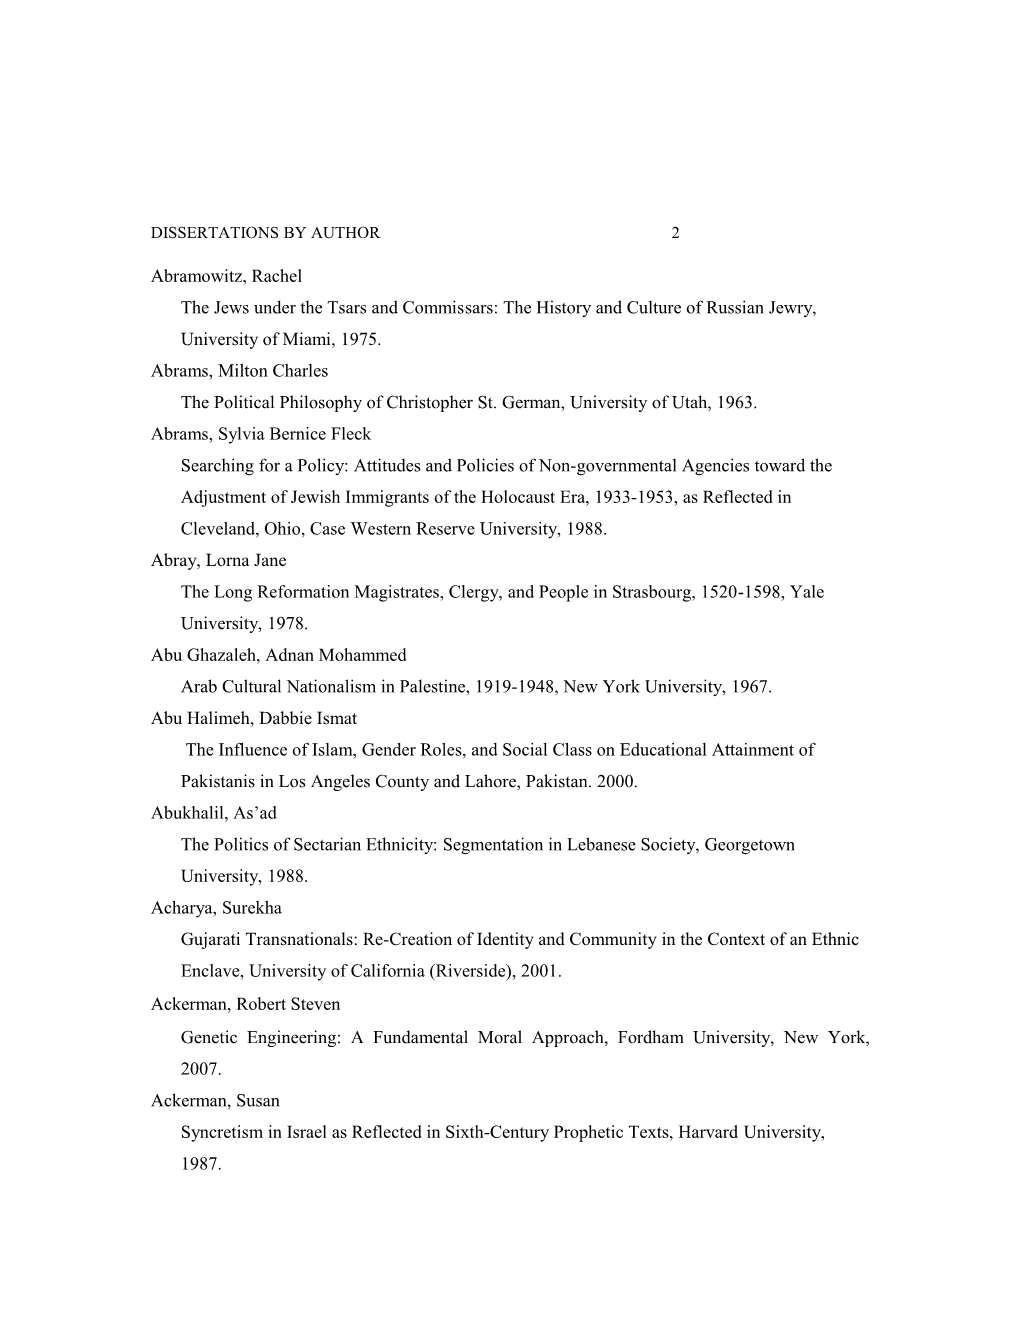 Doctoral Dissertations by Author